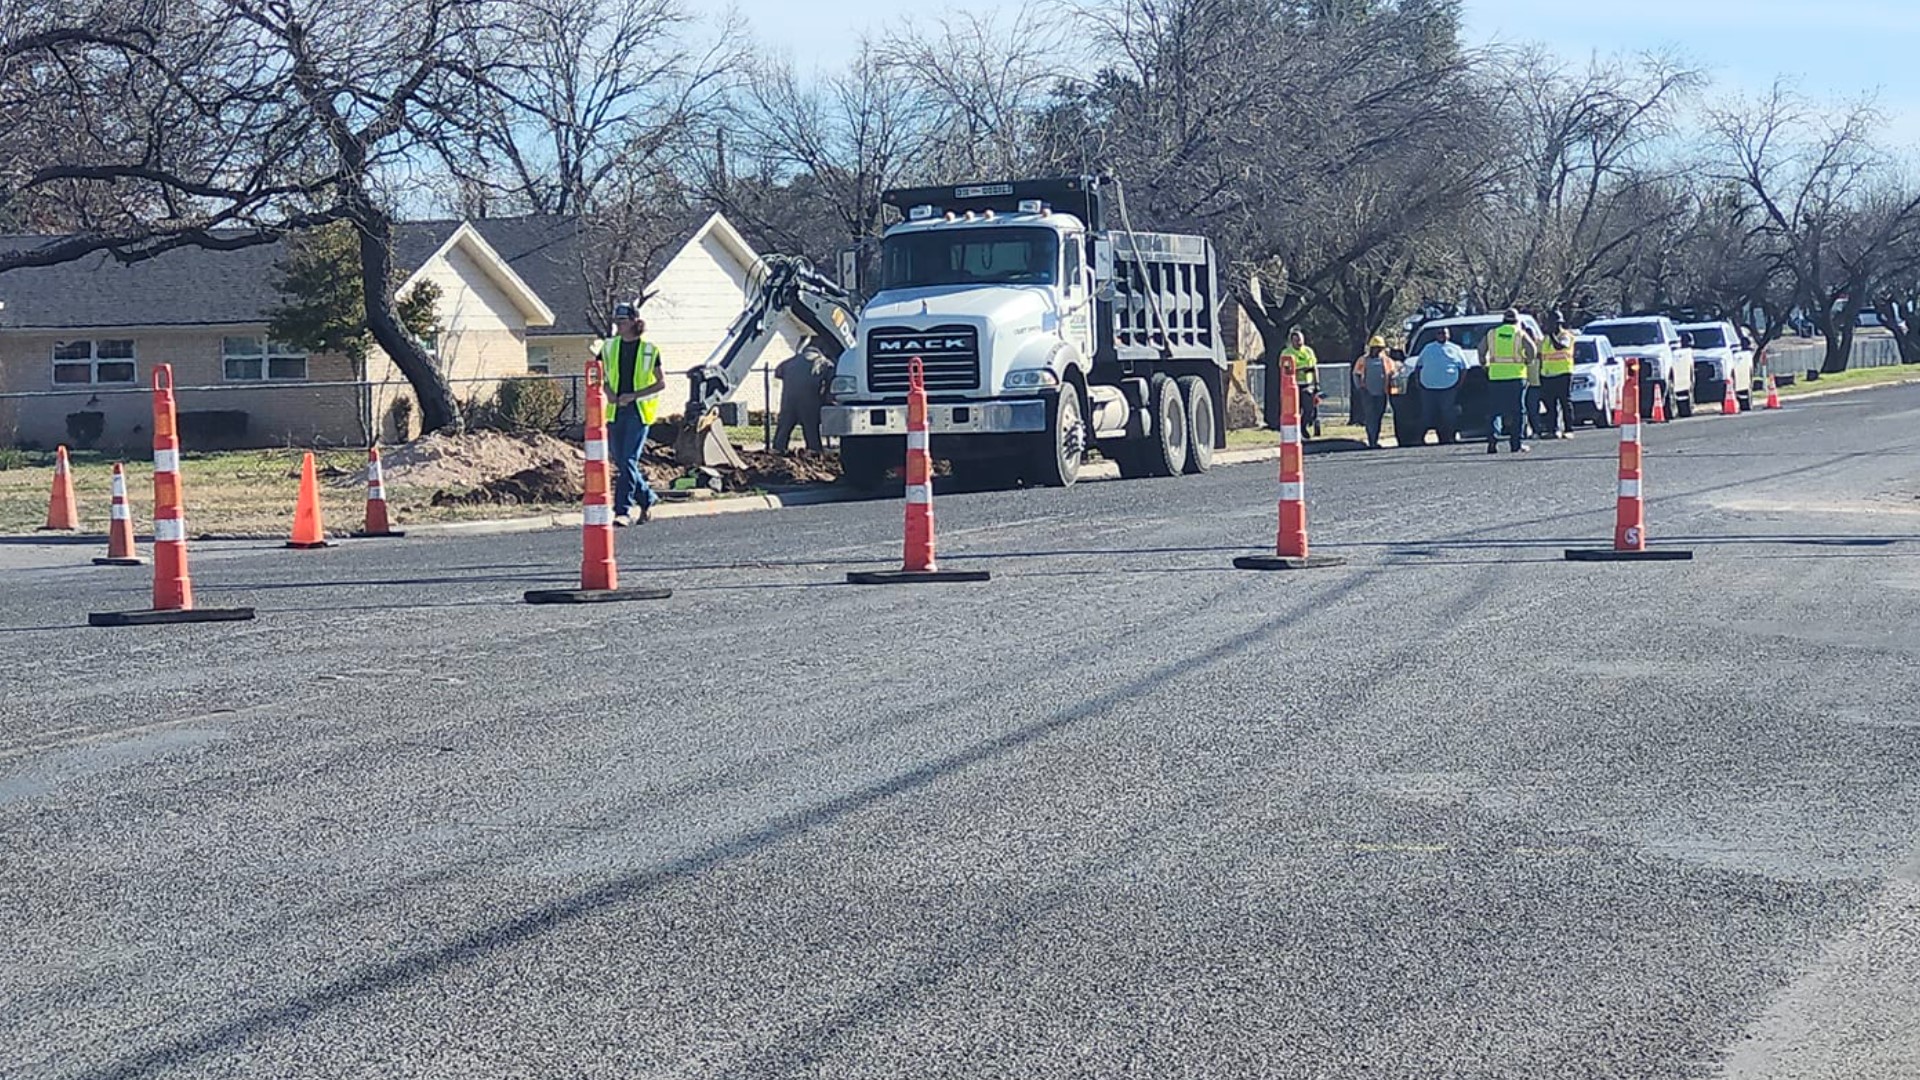 Atmos Energy said a construction crew working on an unrelated project hit the natural gasline.